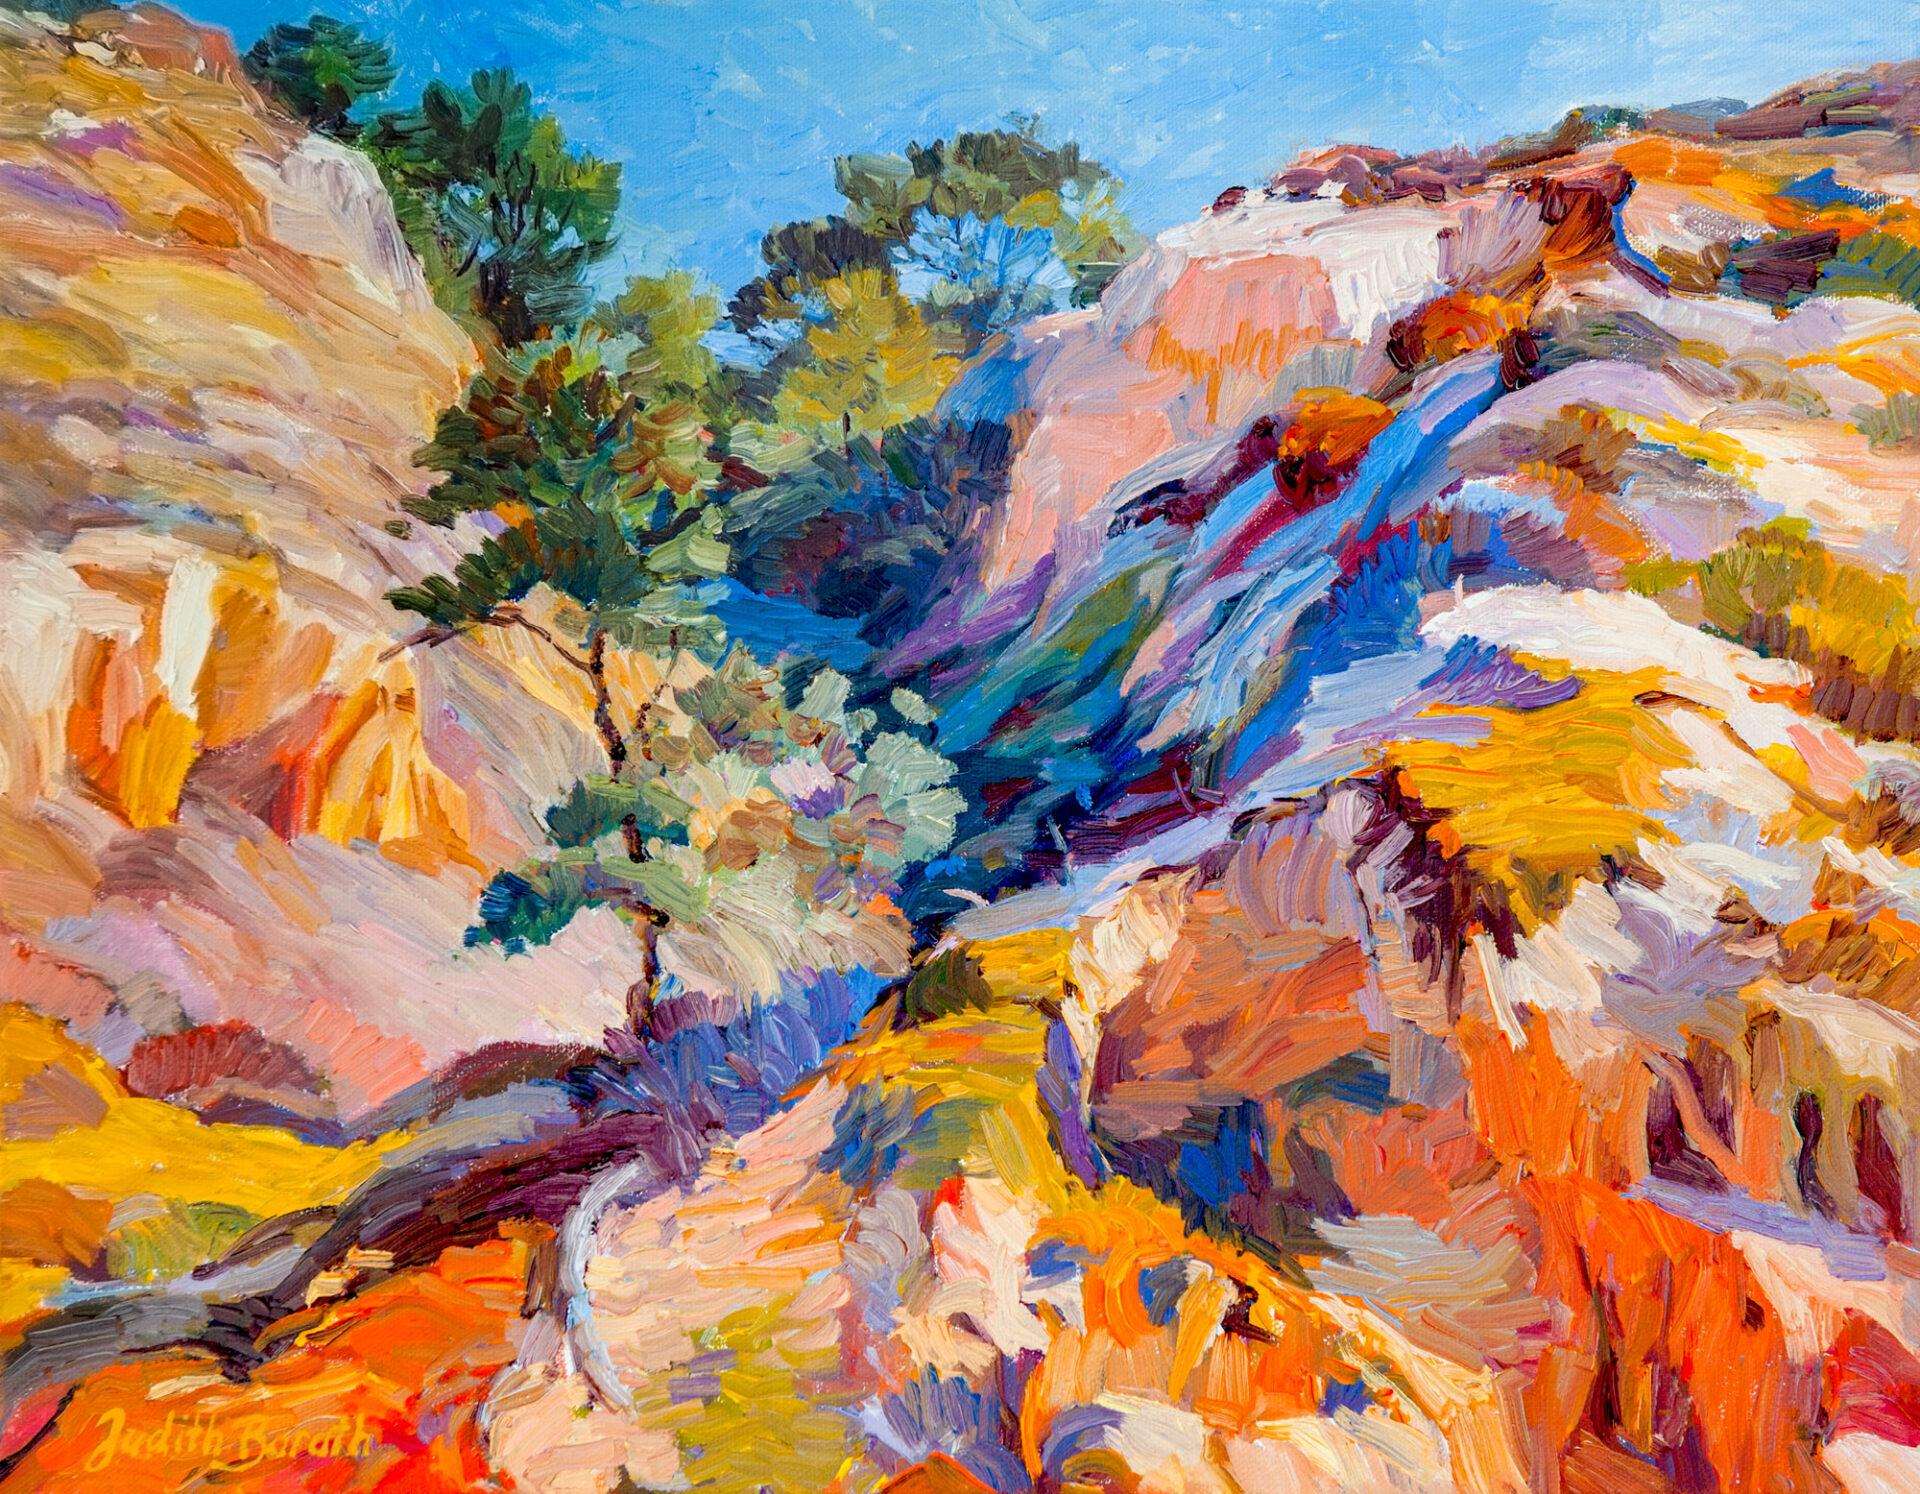 SANDSTONE CANYON - Painting by Judith Barath